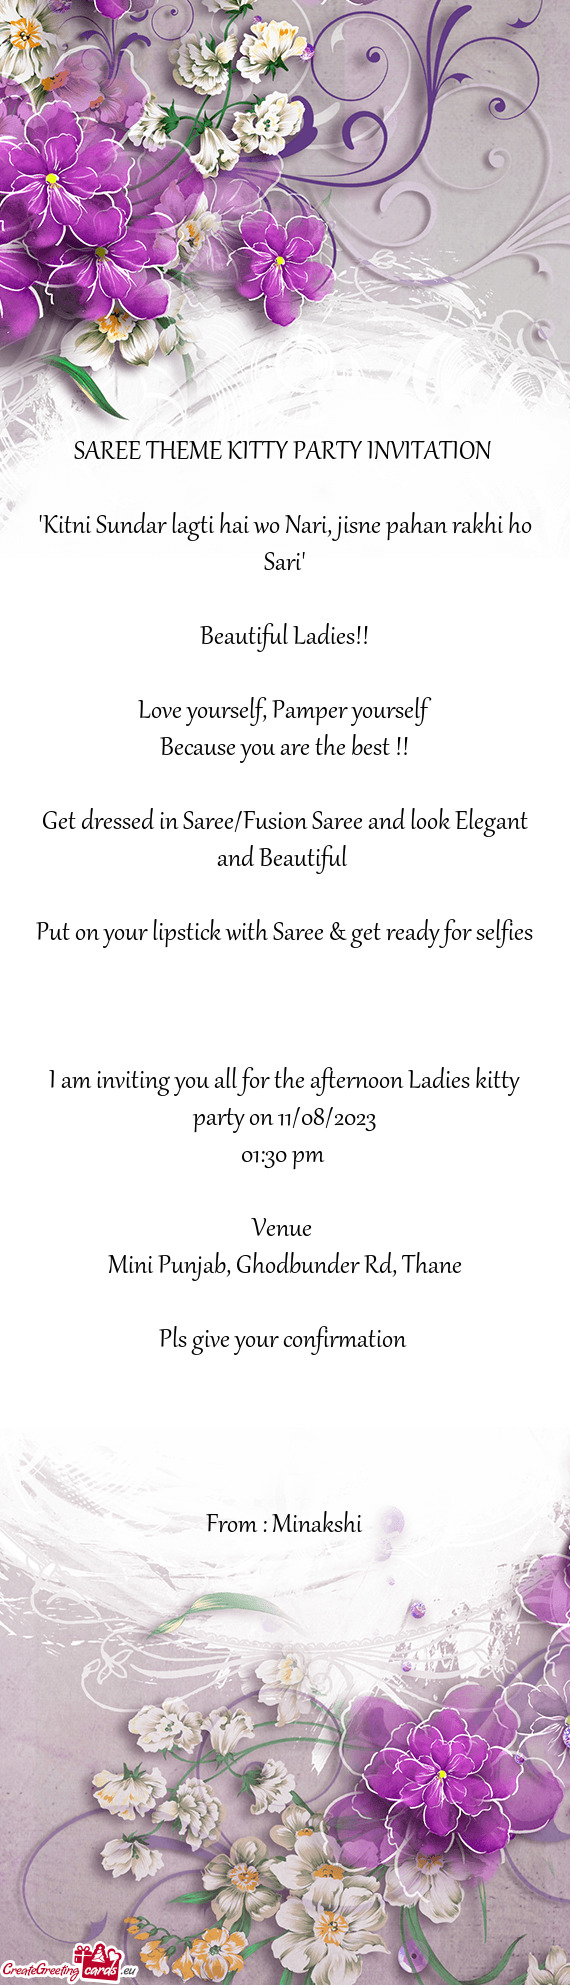 I am inviting you all for the afternoon Ladies kitty party on 11/08/2023